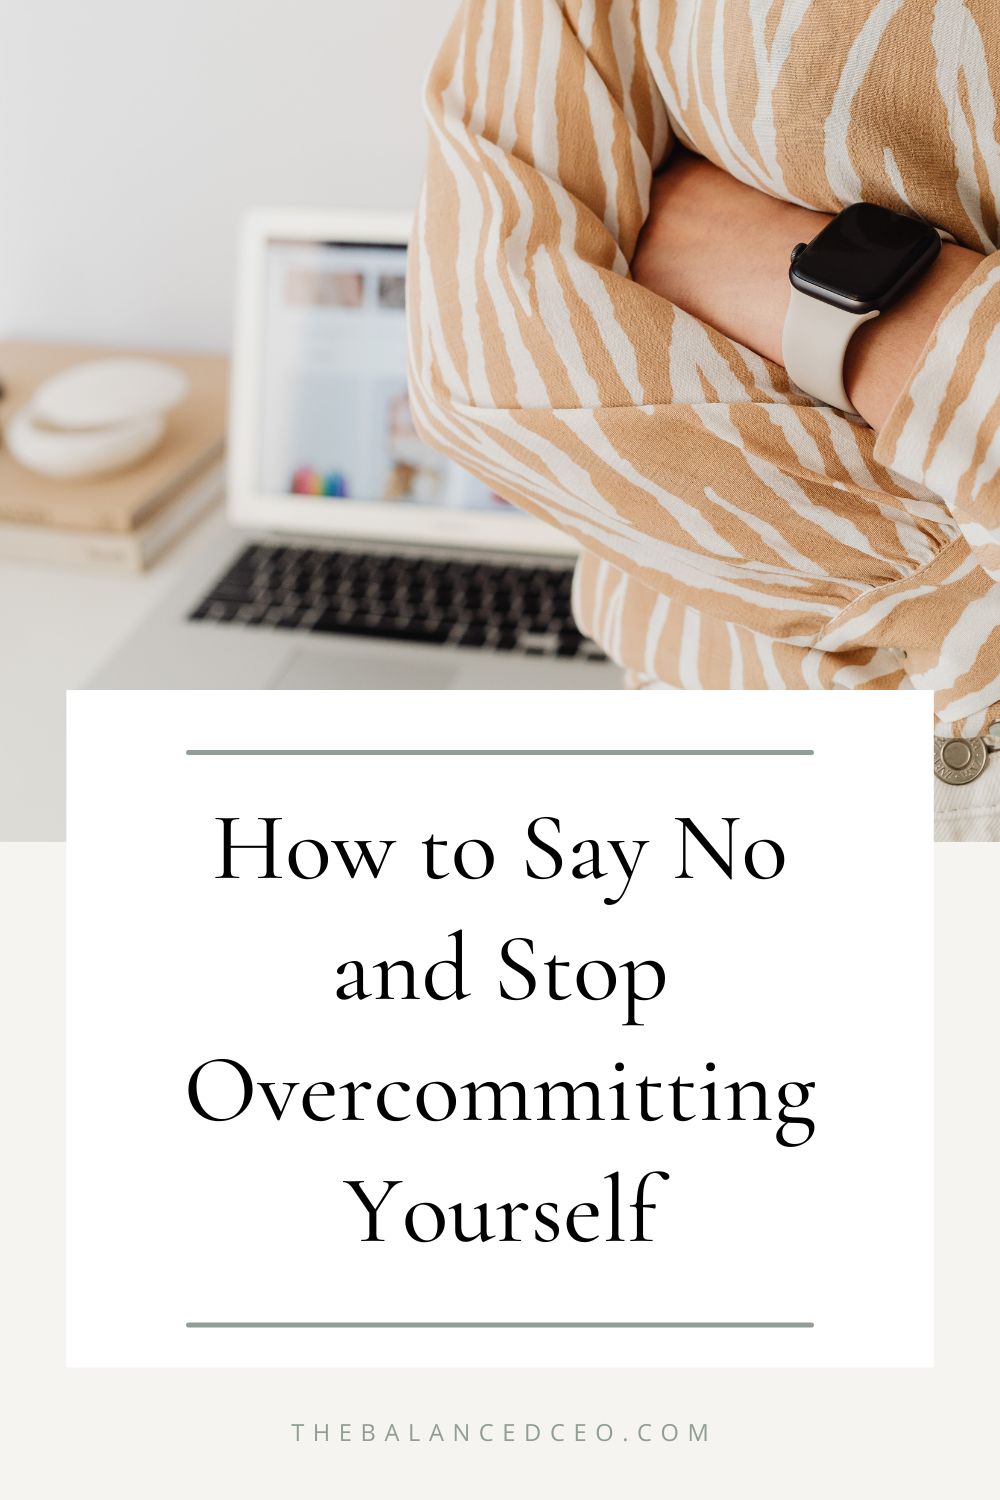 How to Say No and Stop Overcommitting Yourself